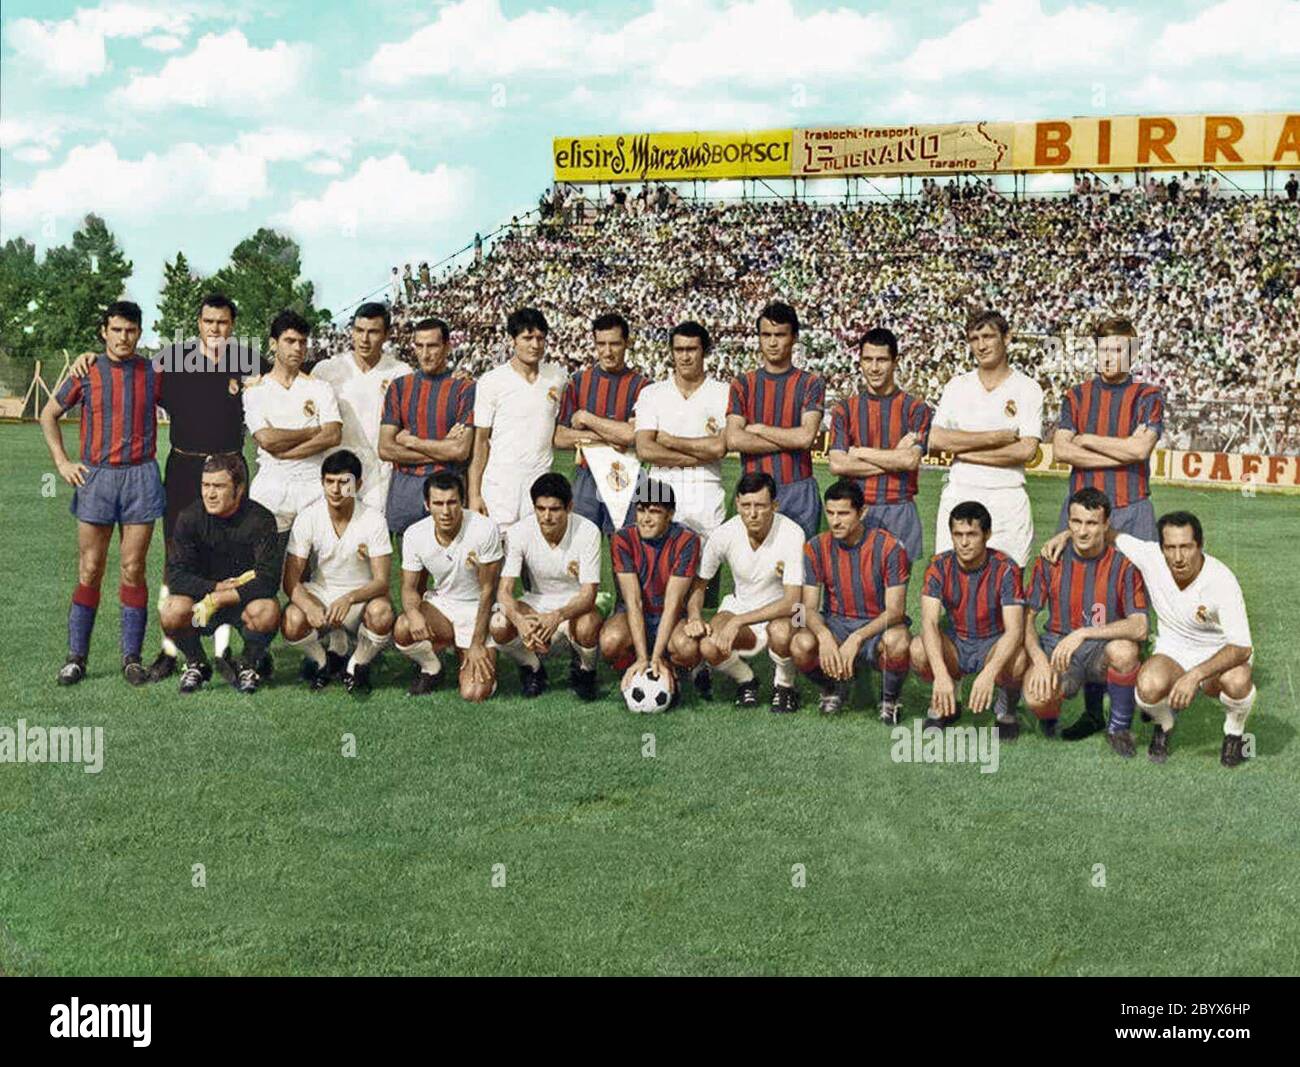 Taranto (Italy), Salinella Stadium, September 8, 1968. A mixed photo group before the start of a friendly match between A.S. Taranto versus Real Madrid C.F. Stock Photo